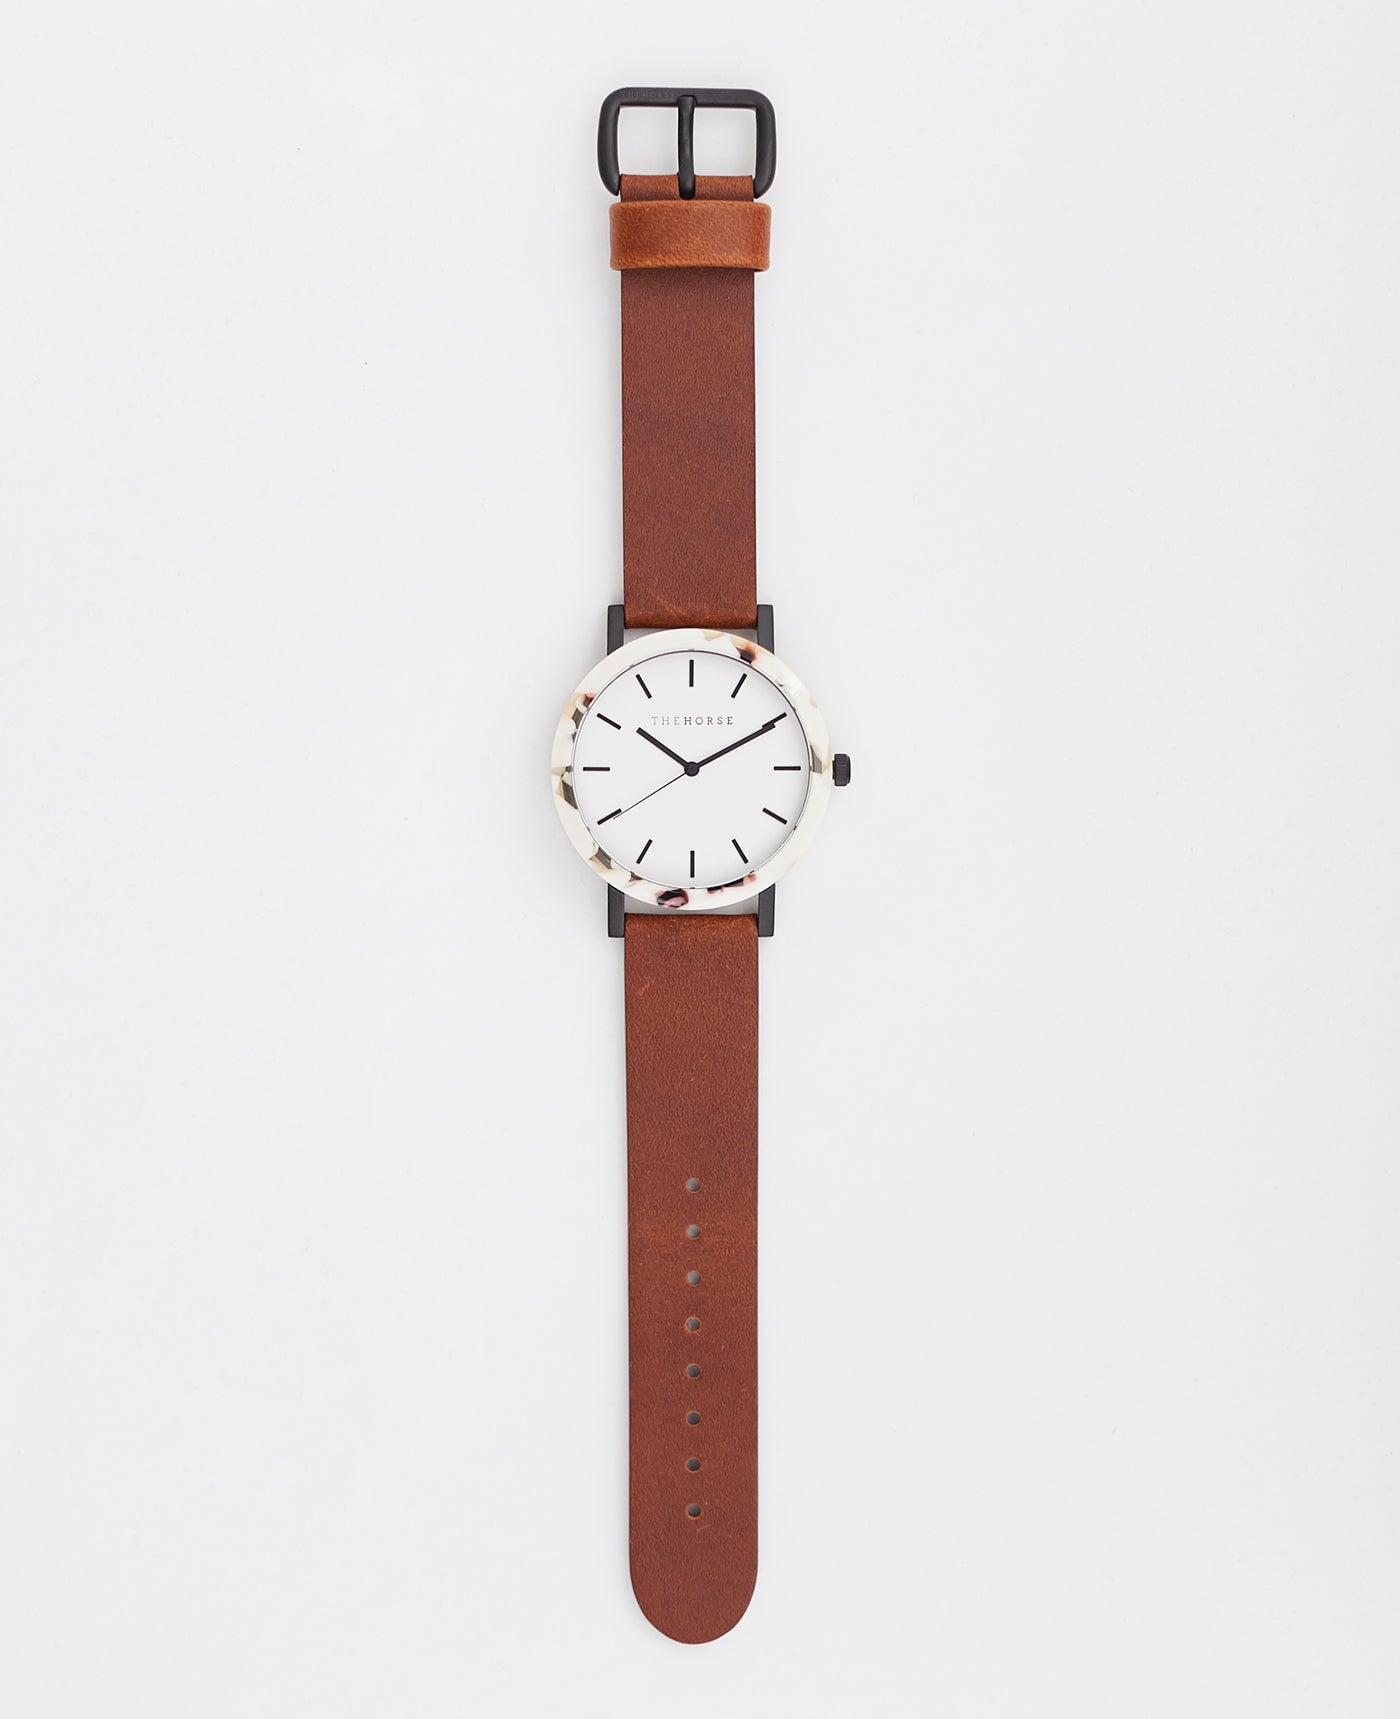 The Resin Women's Watch in Nougat Shell / White Dial / Tan Leather Strap by The Horse